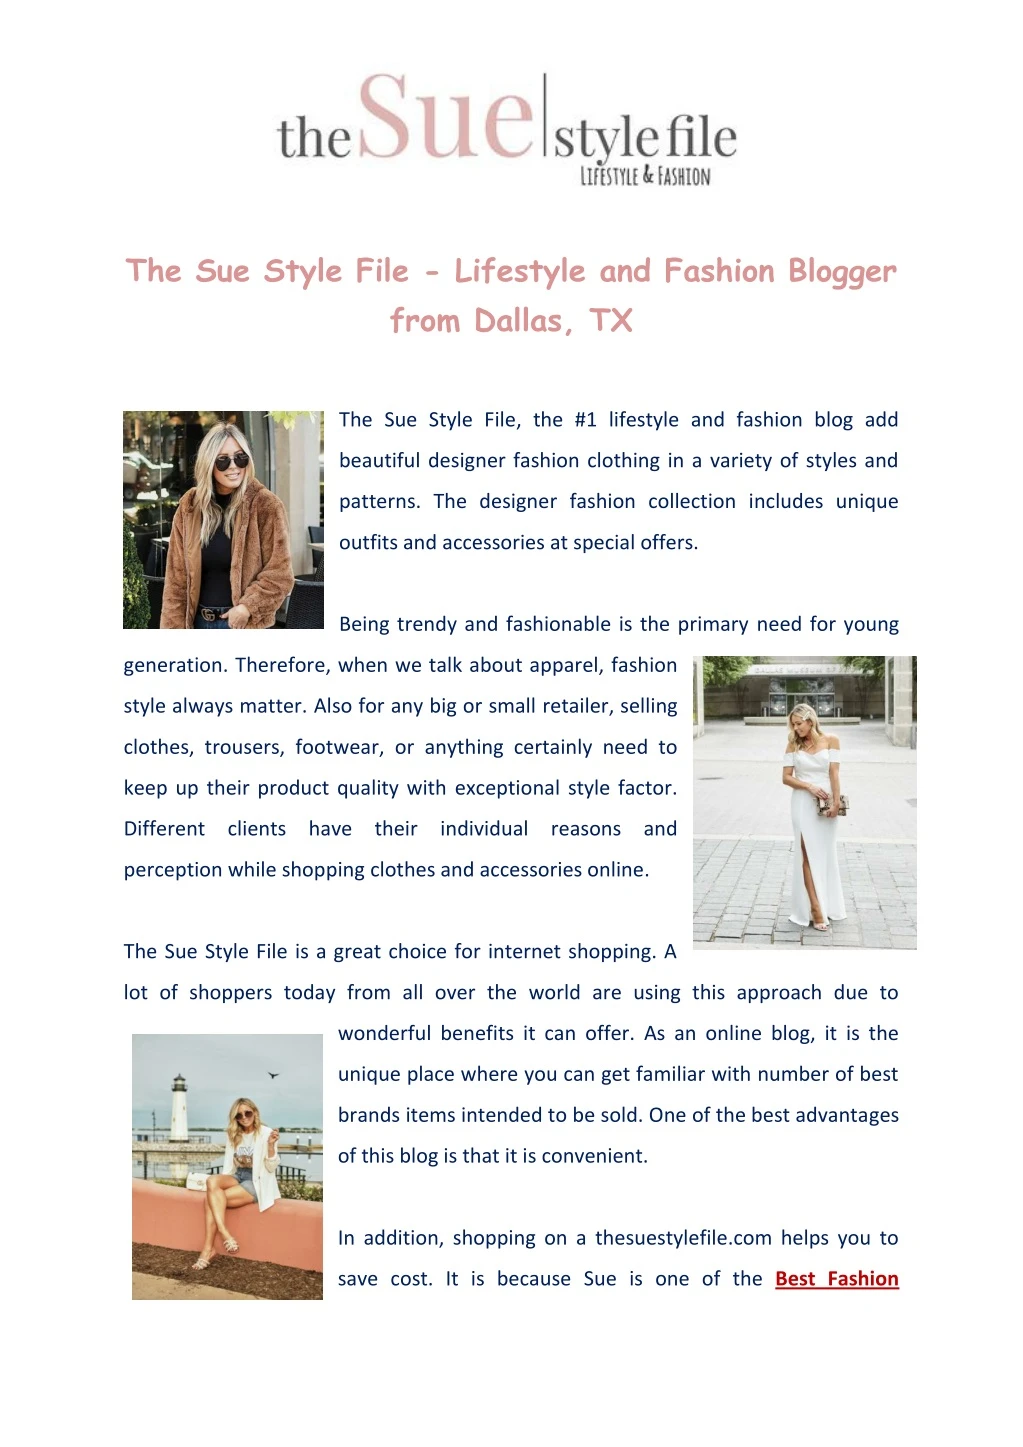 the sue style file lifestyle and fashion blogger